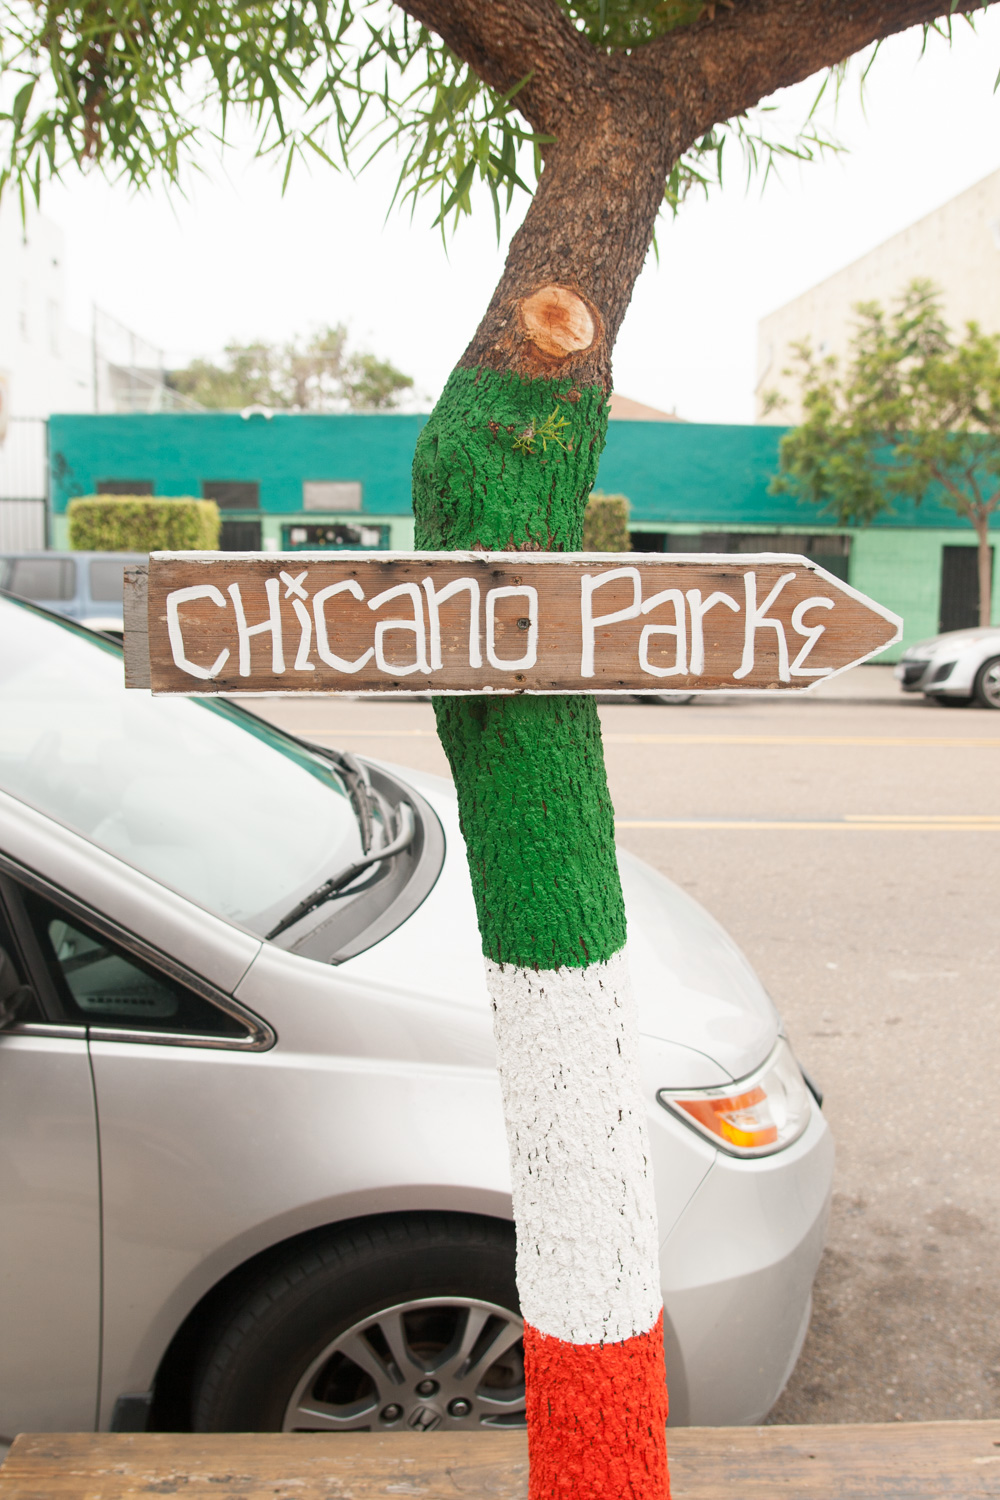 Chicano Park sign